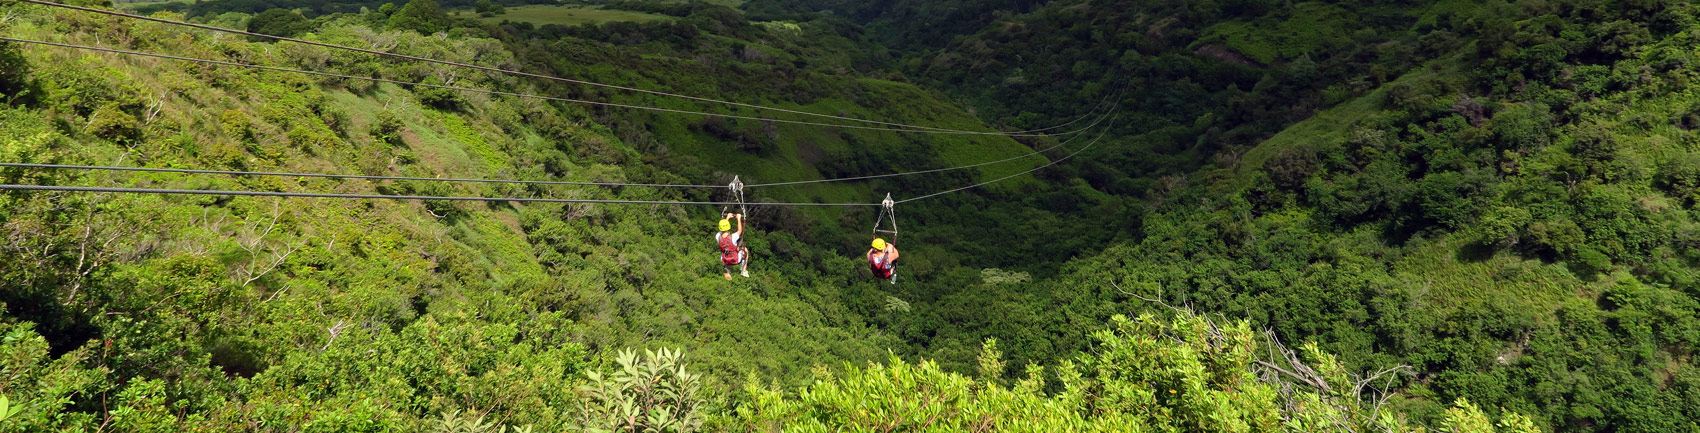 View of two people on zip lines carrying them over green trees and foliage into a valley.